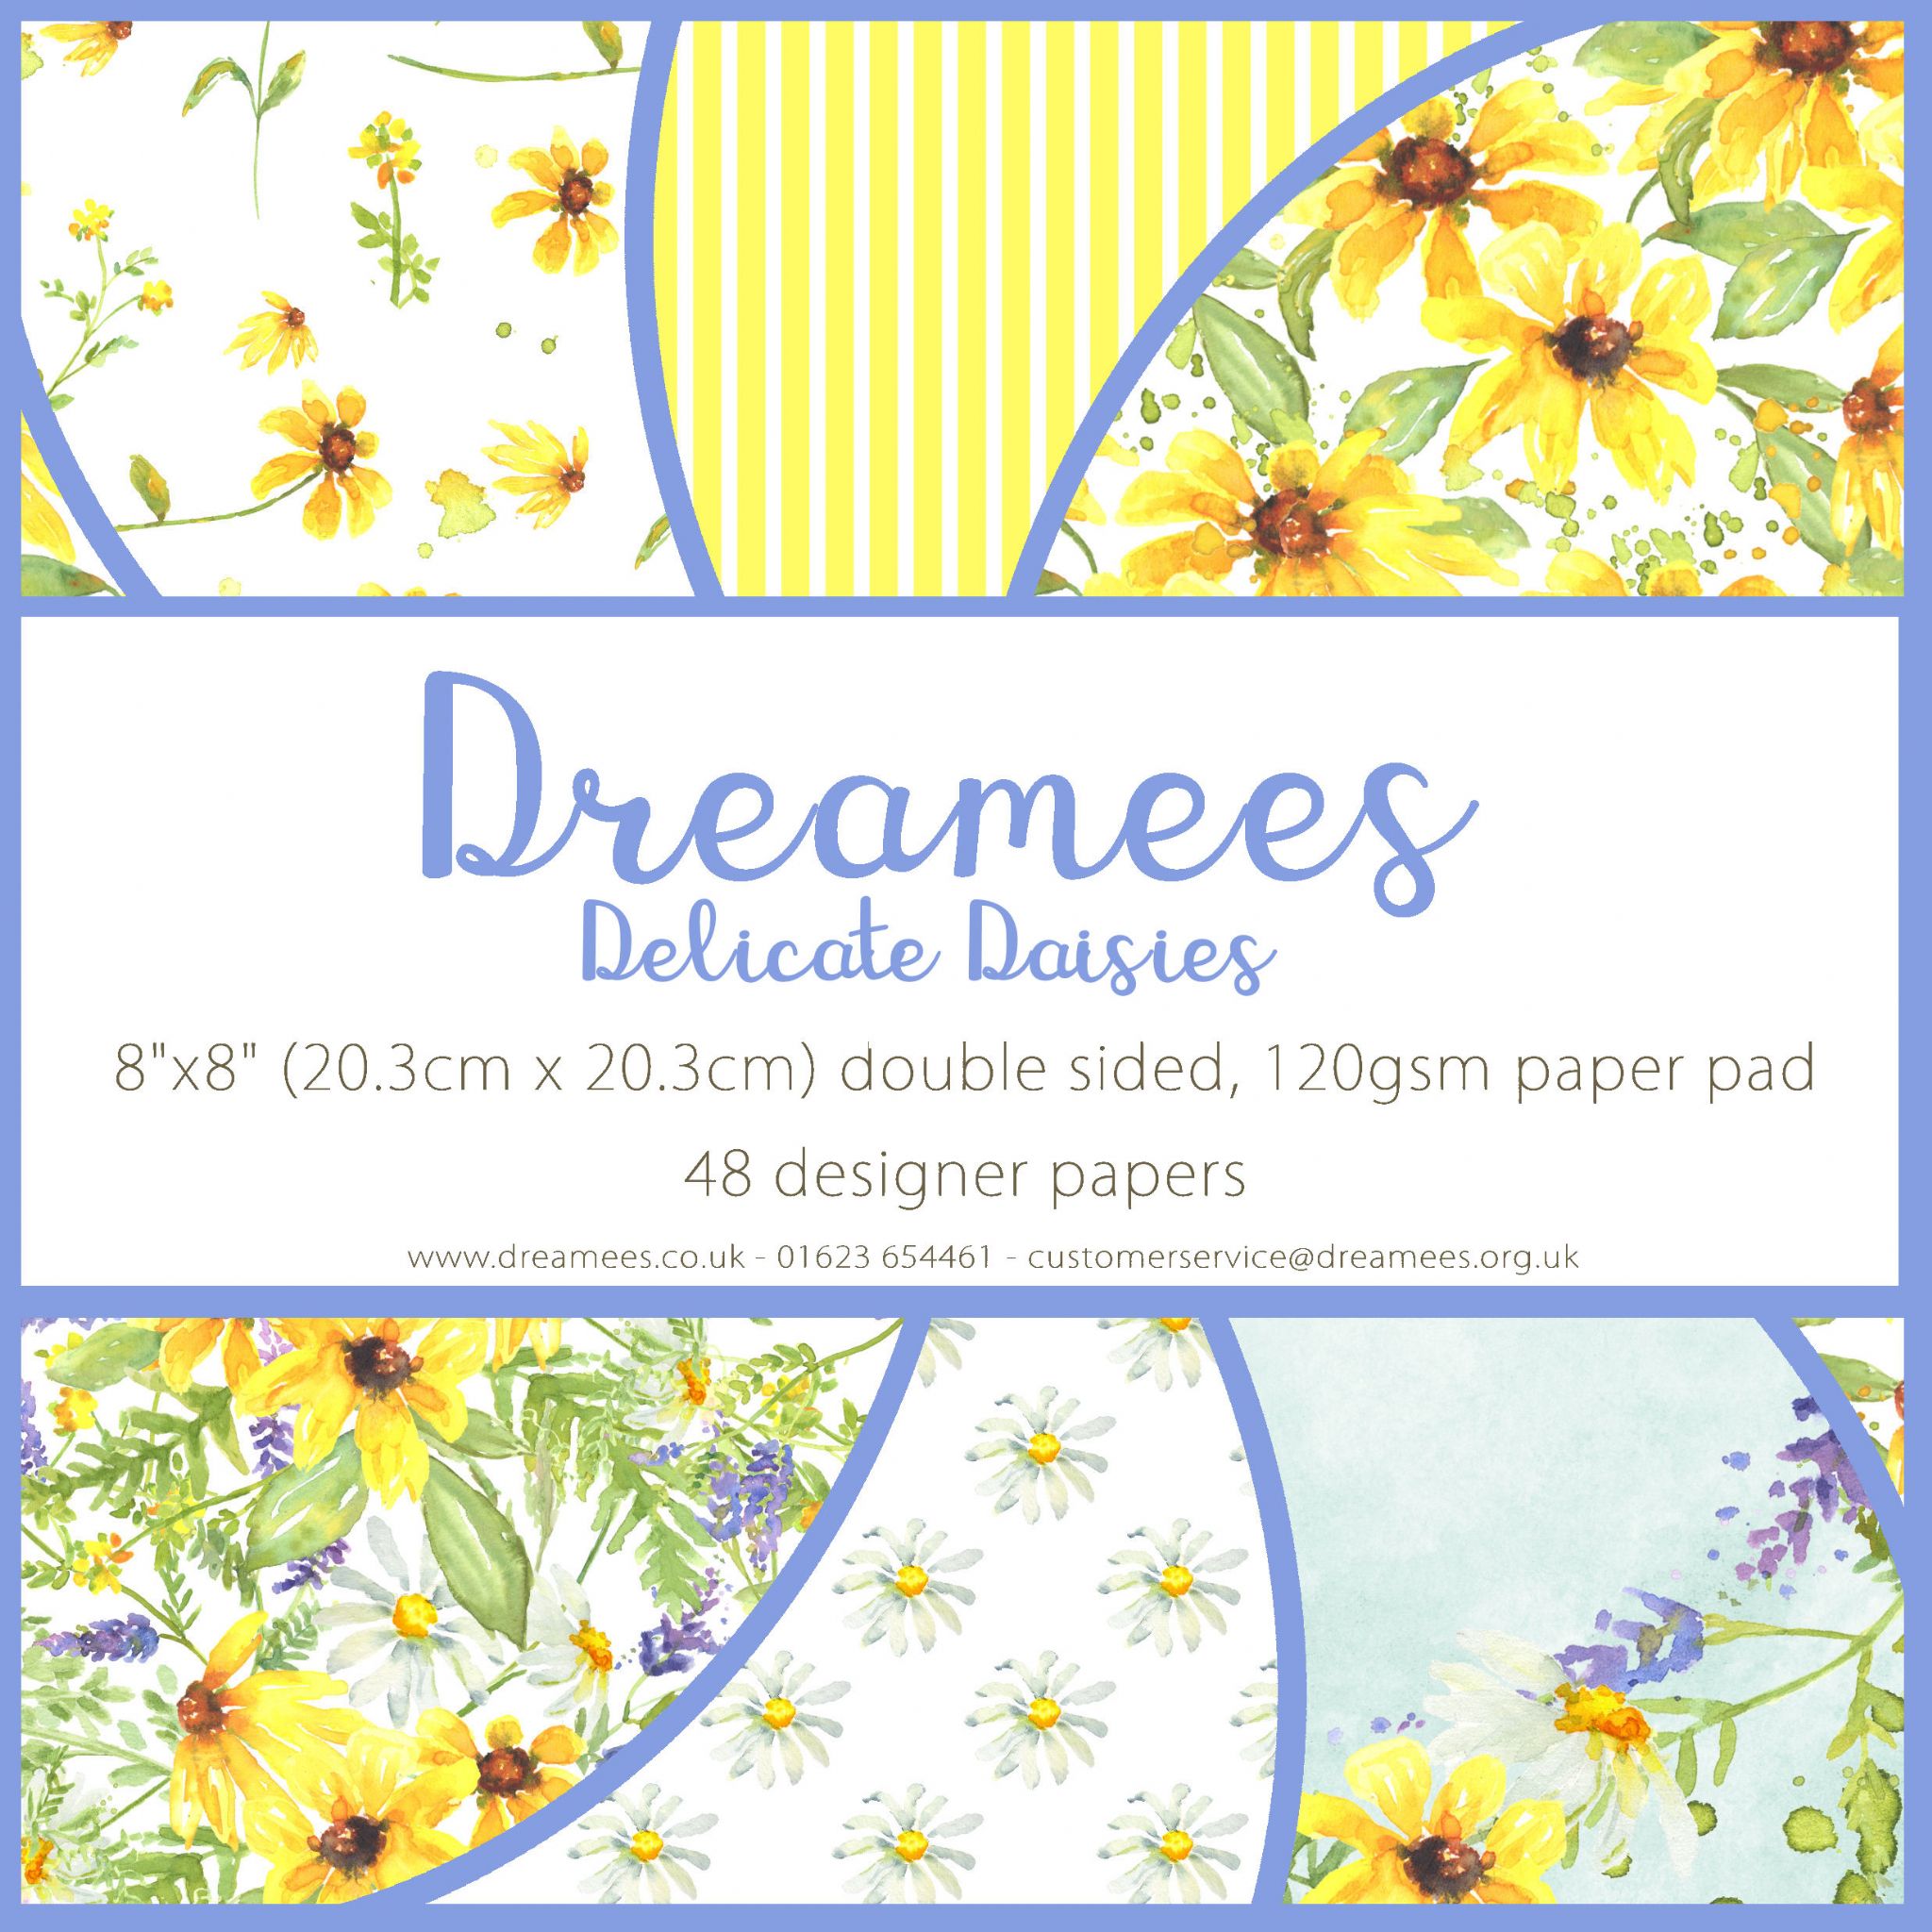 Dreamees Delicate Daisies 8x8 Paper Pad